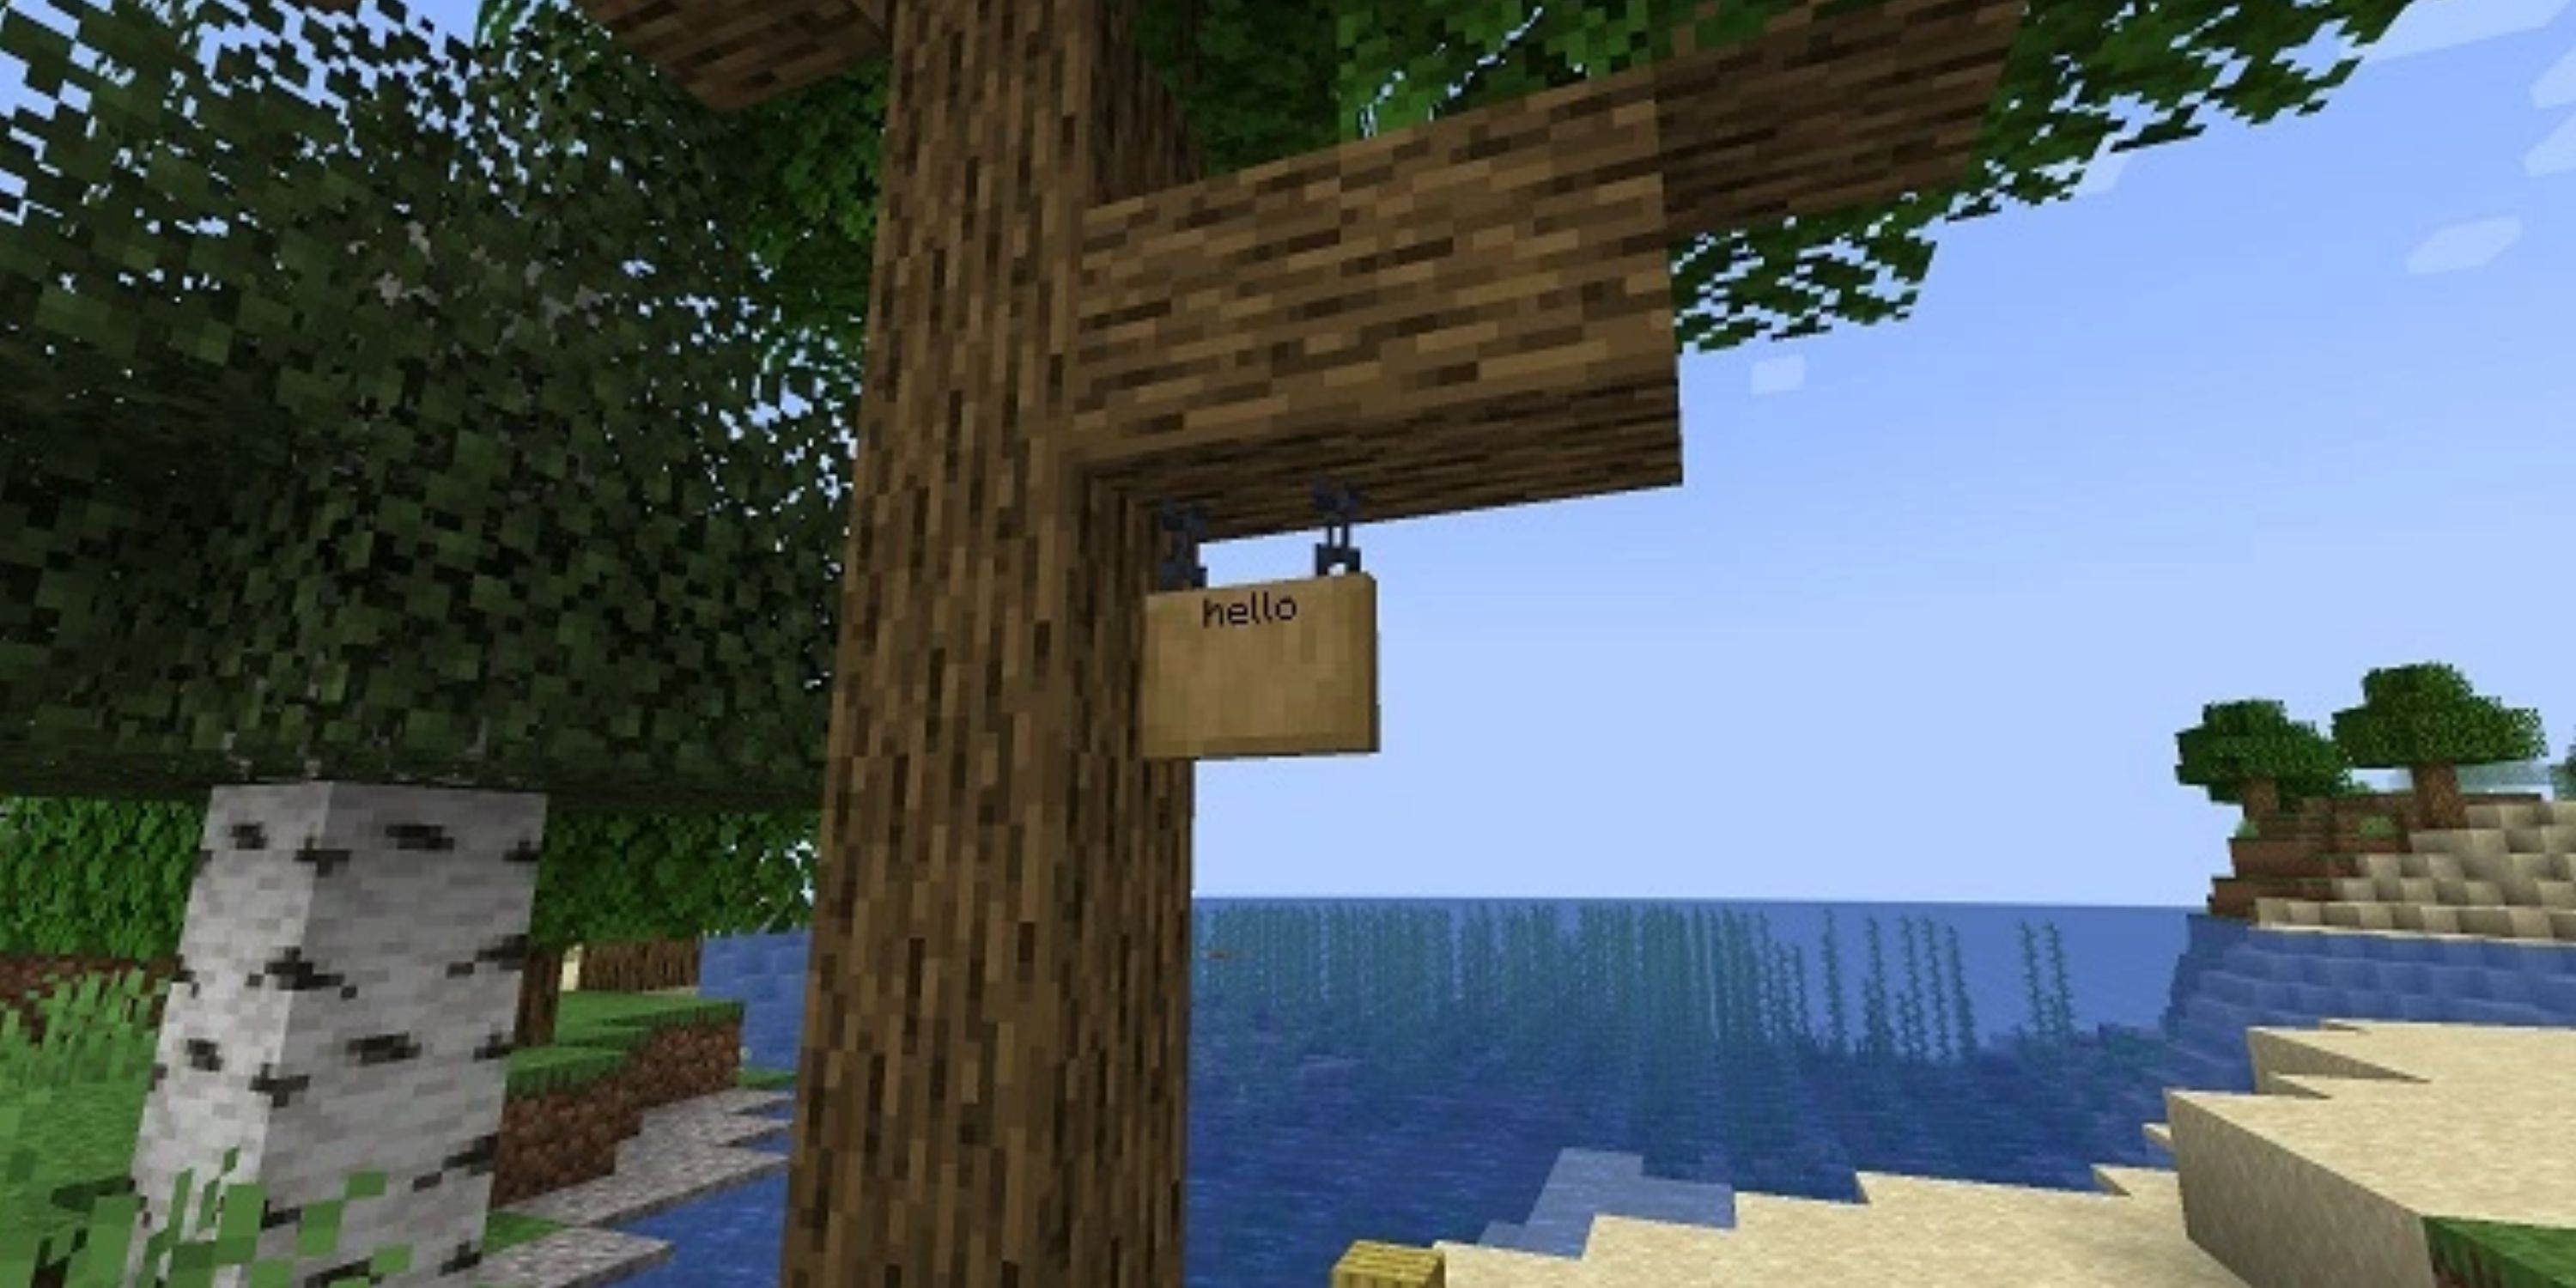 hanging sign in minecraft